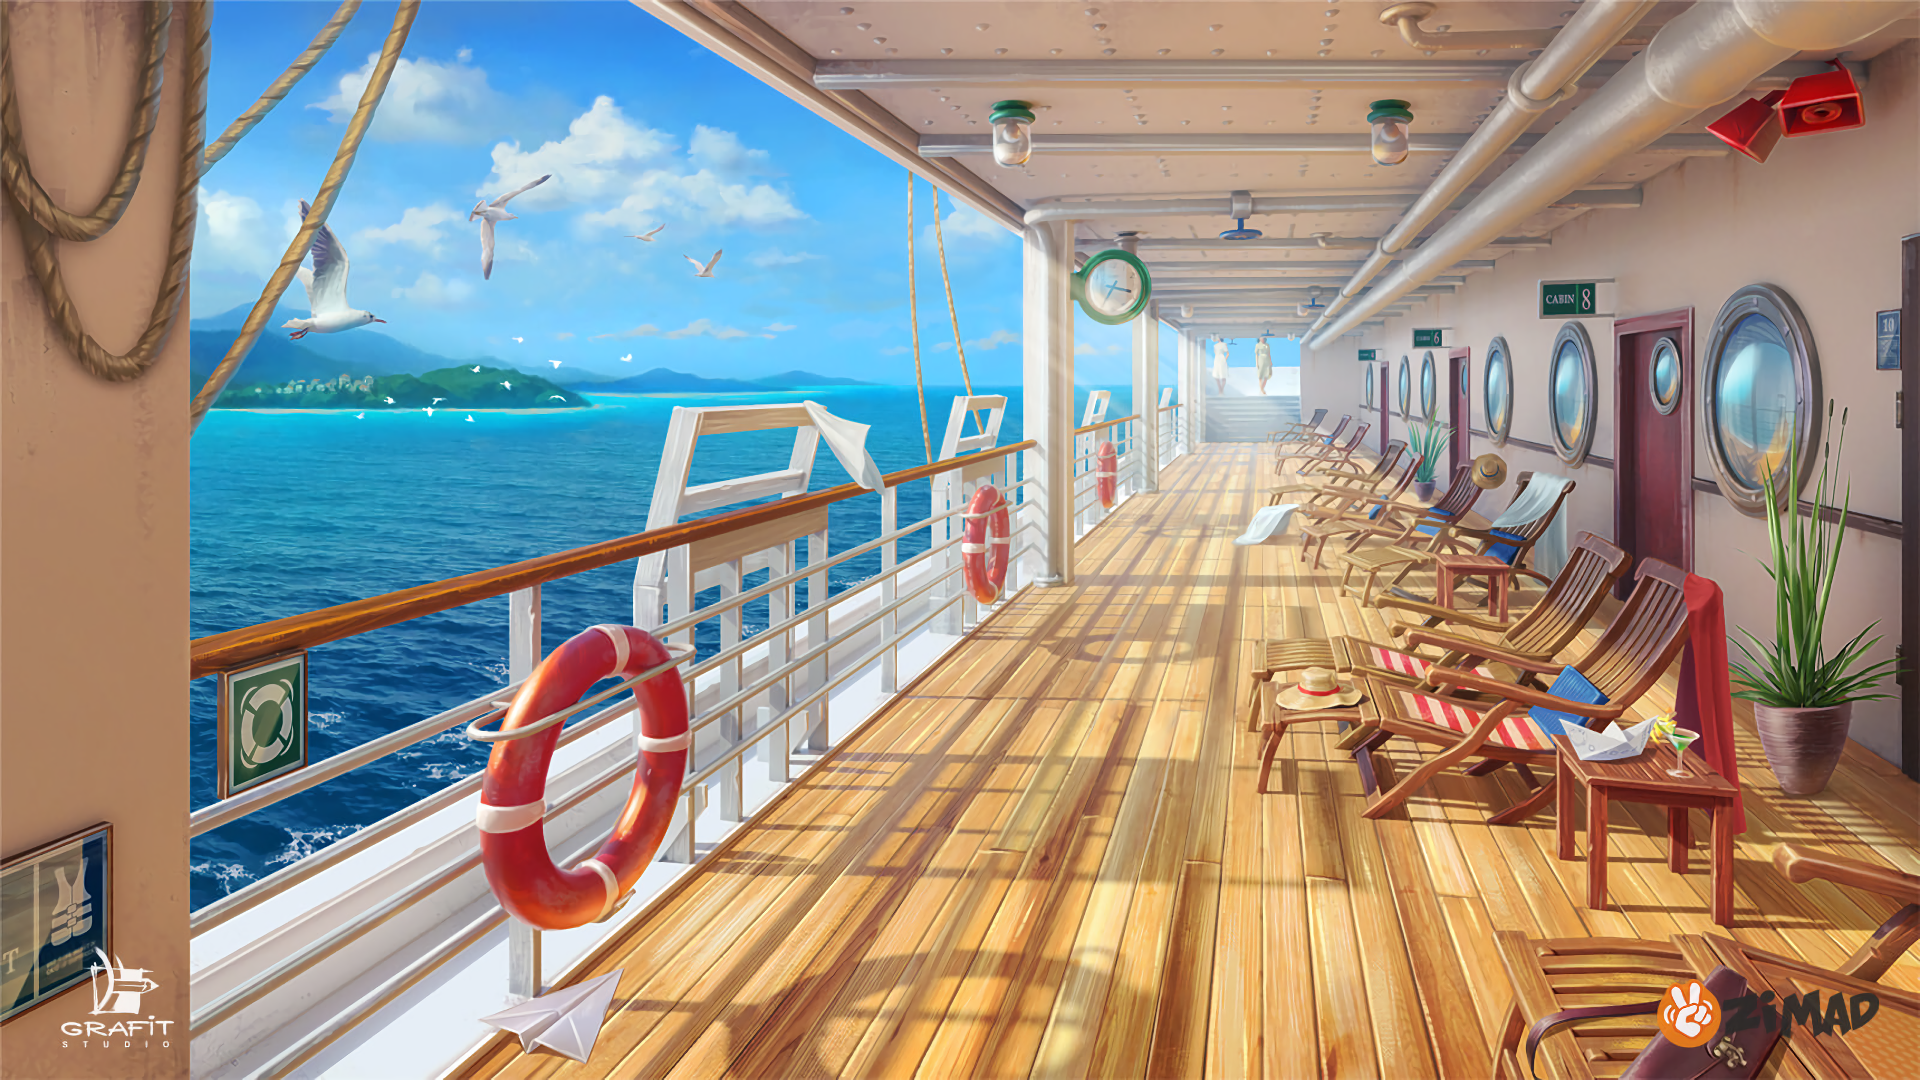 Deck of a Cruse ship 1920 × 1080